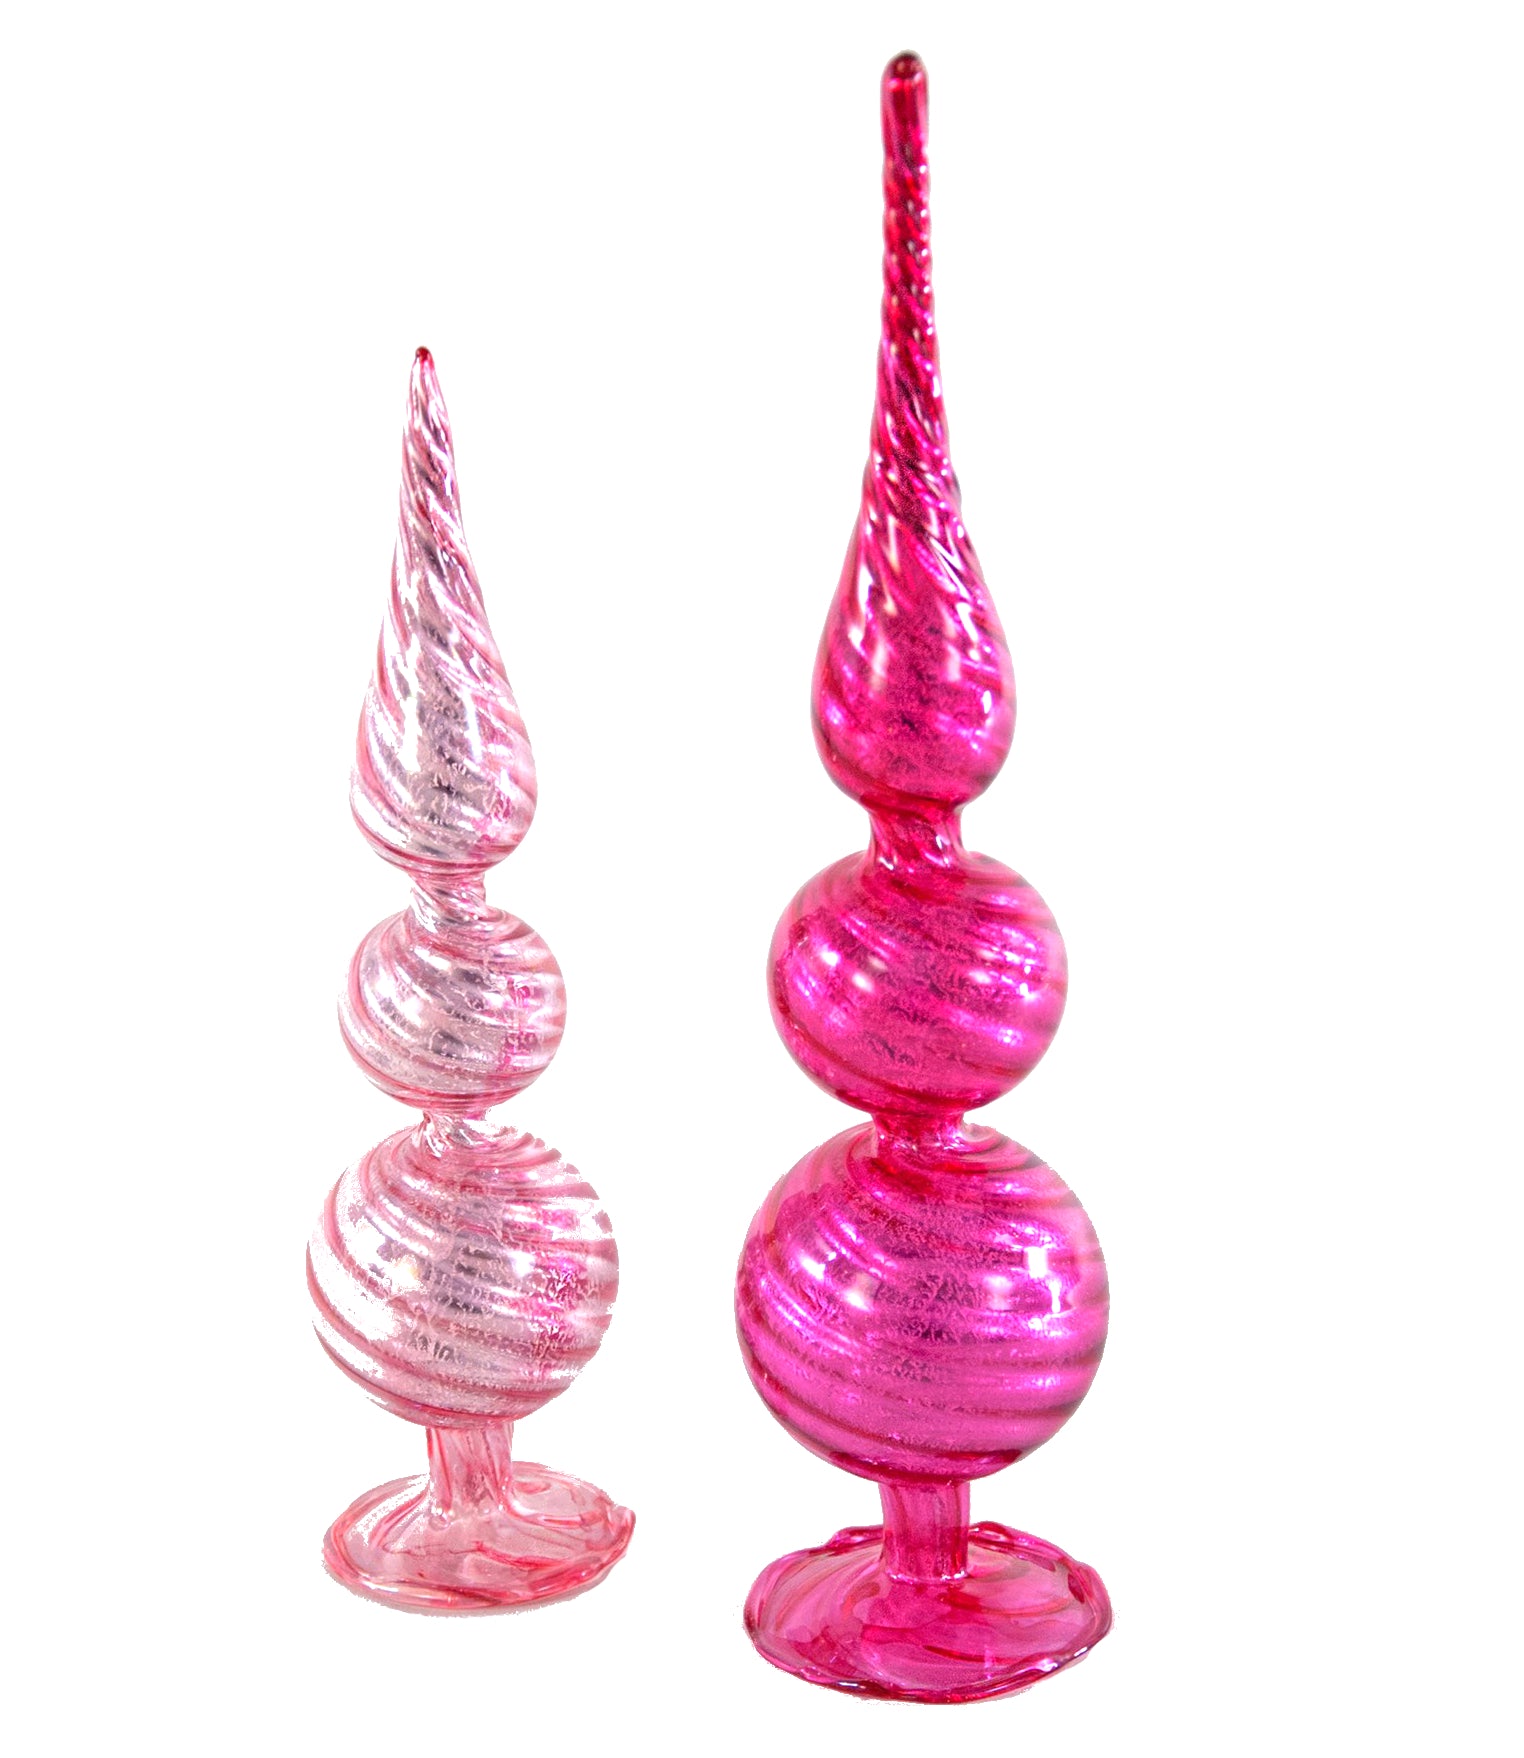 Pink Twisted Tabletop Finials